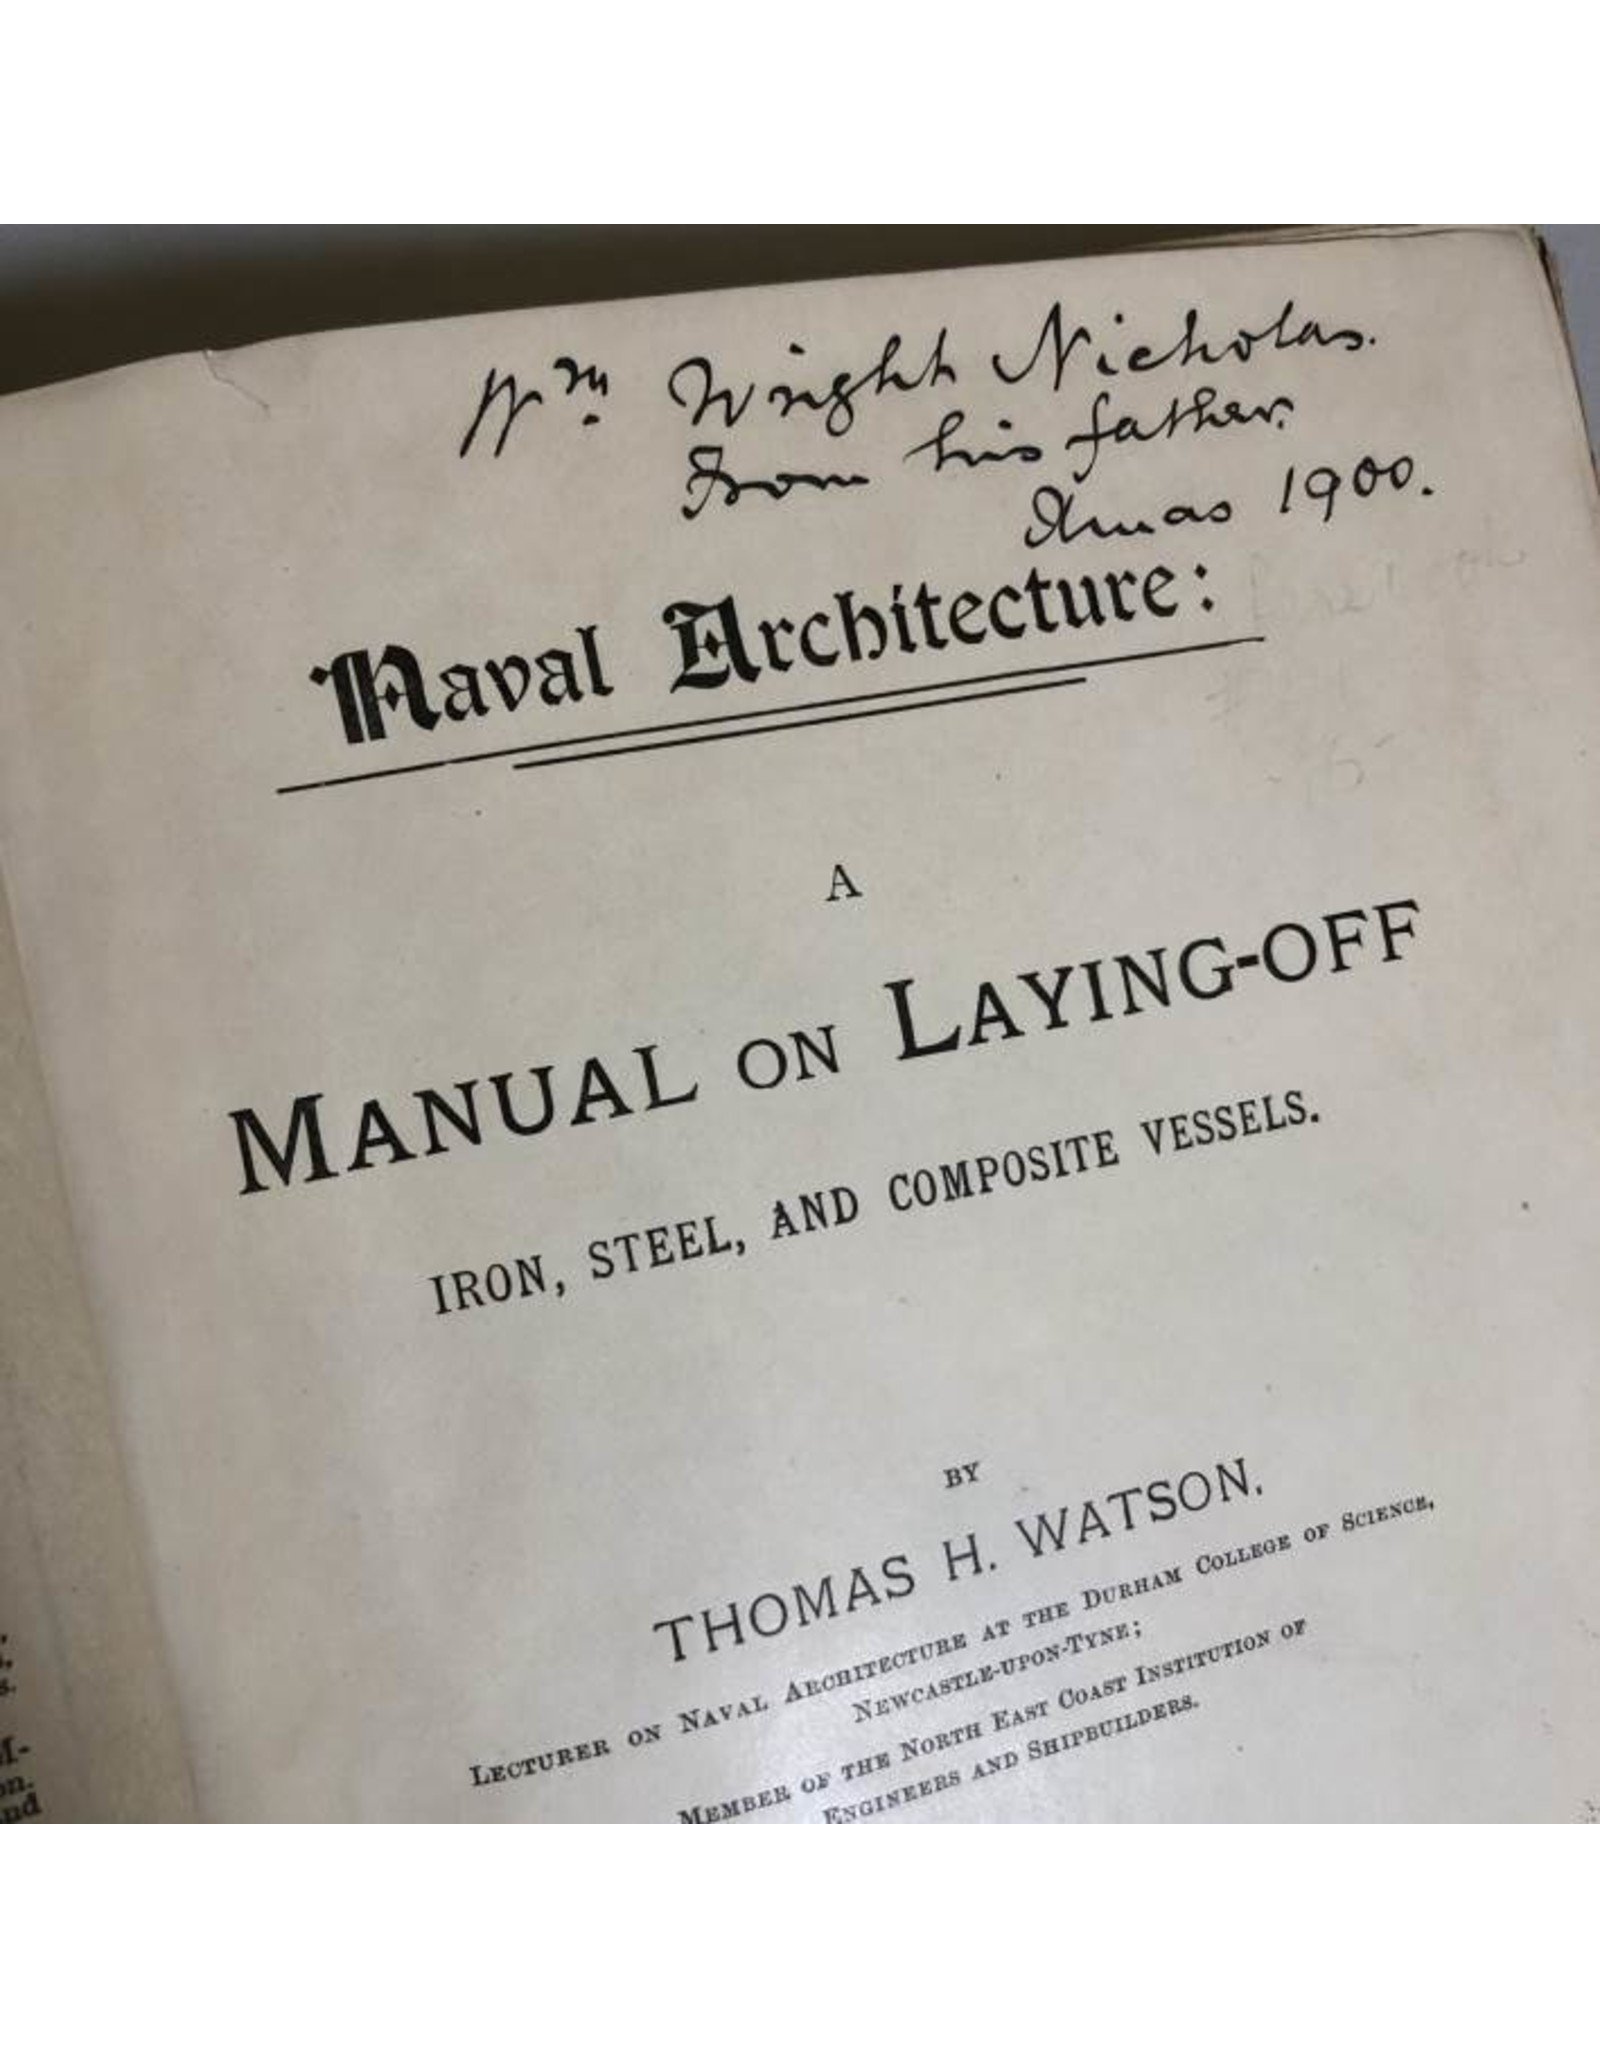 Hardcover book - Naval Architecture 1898